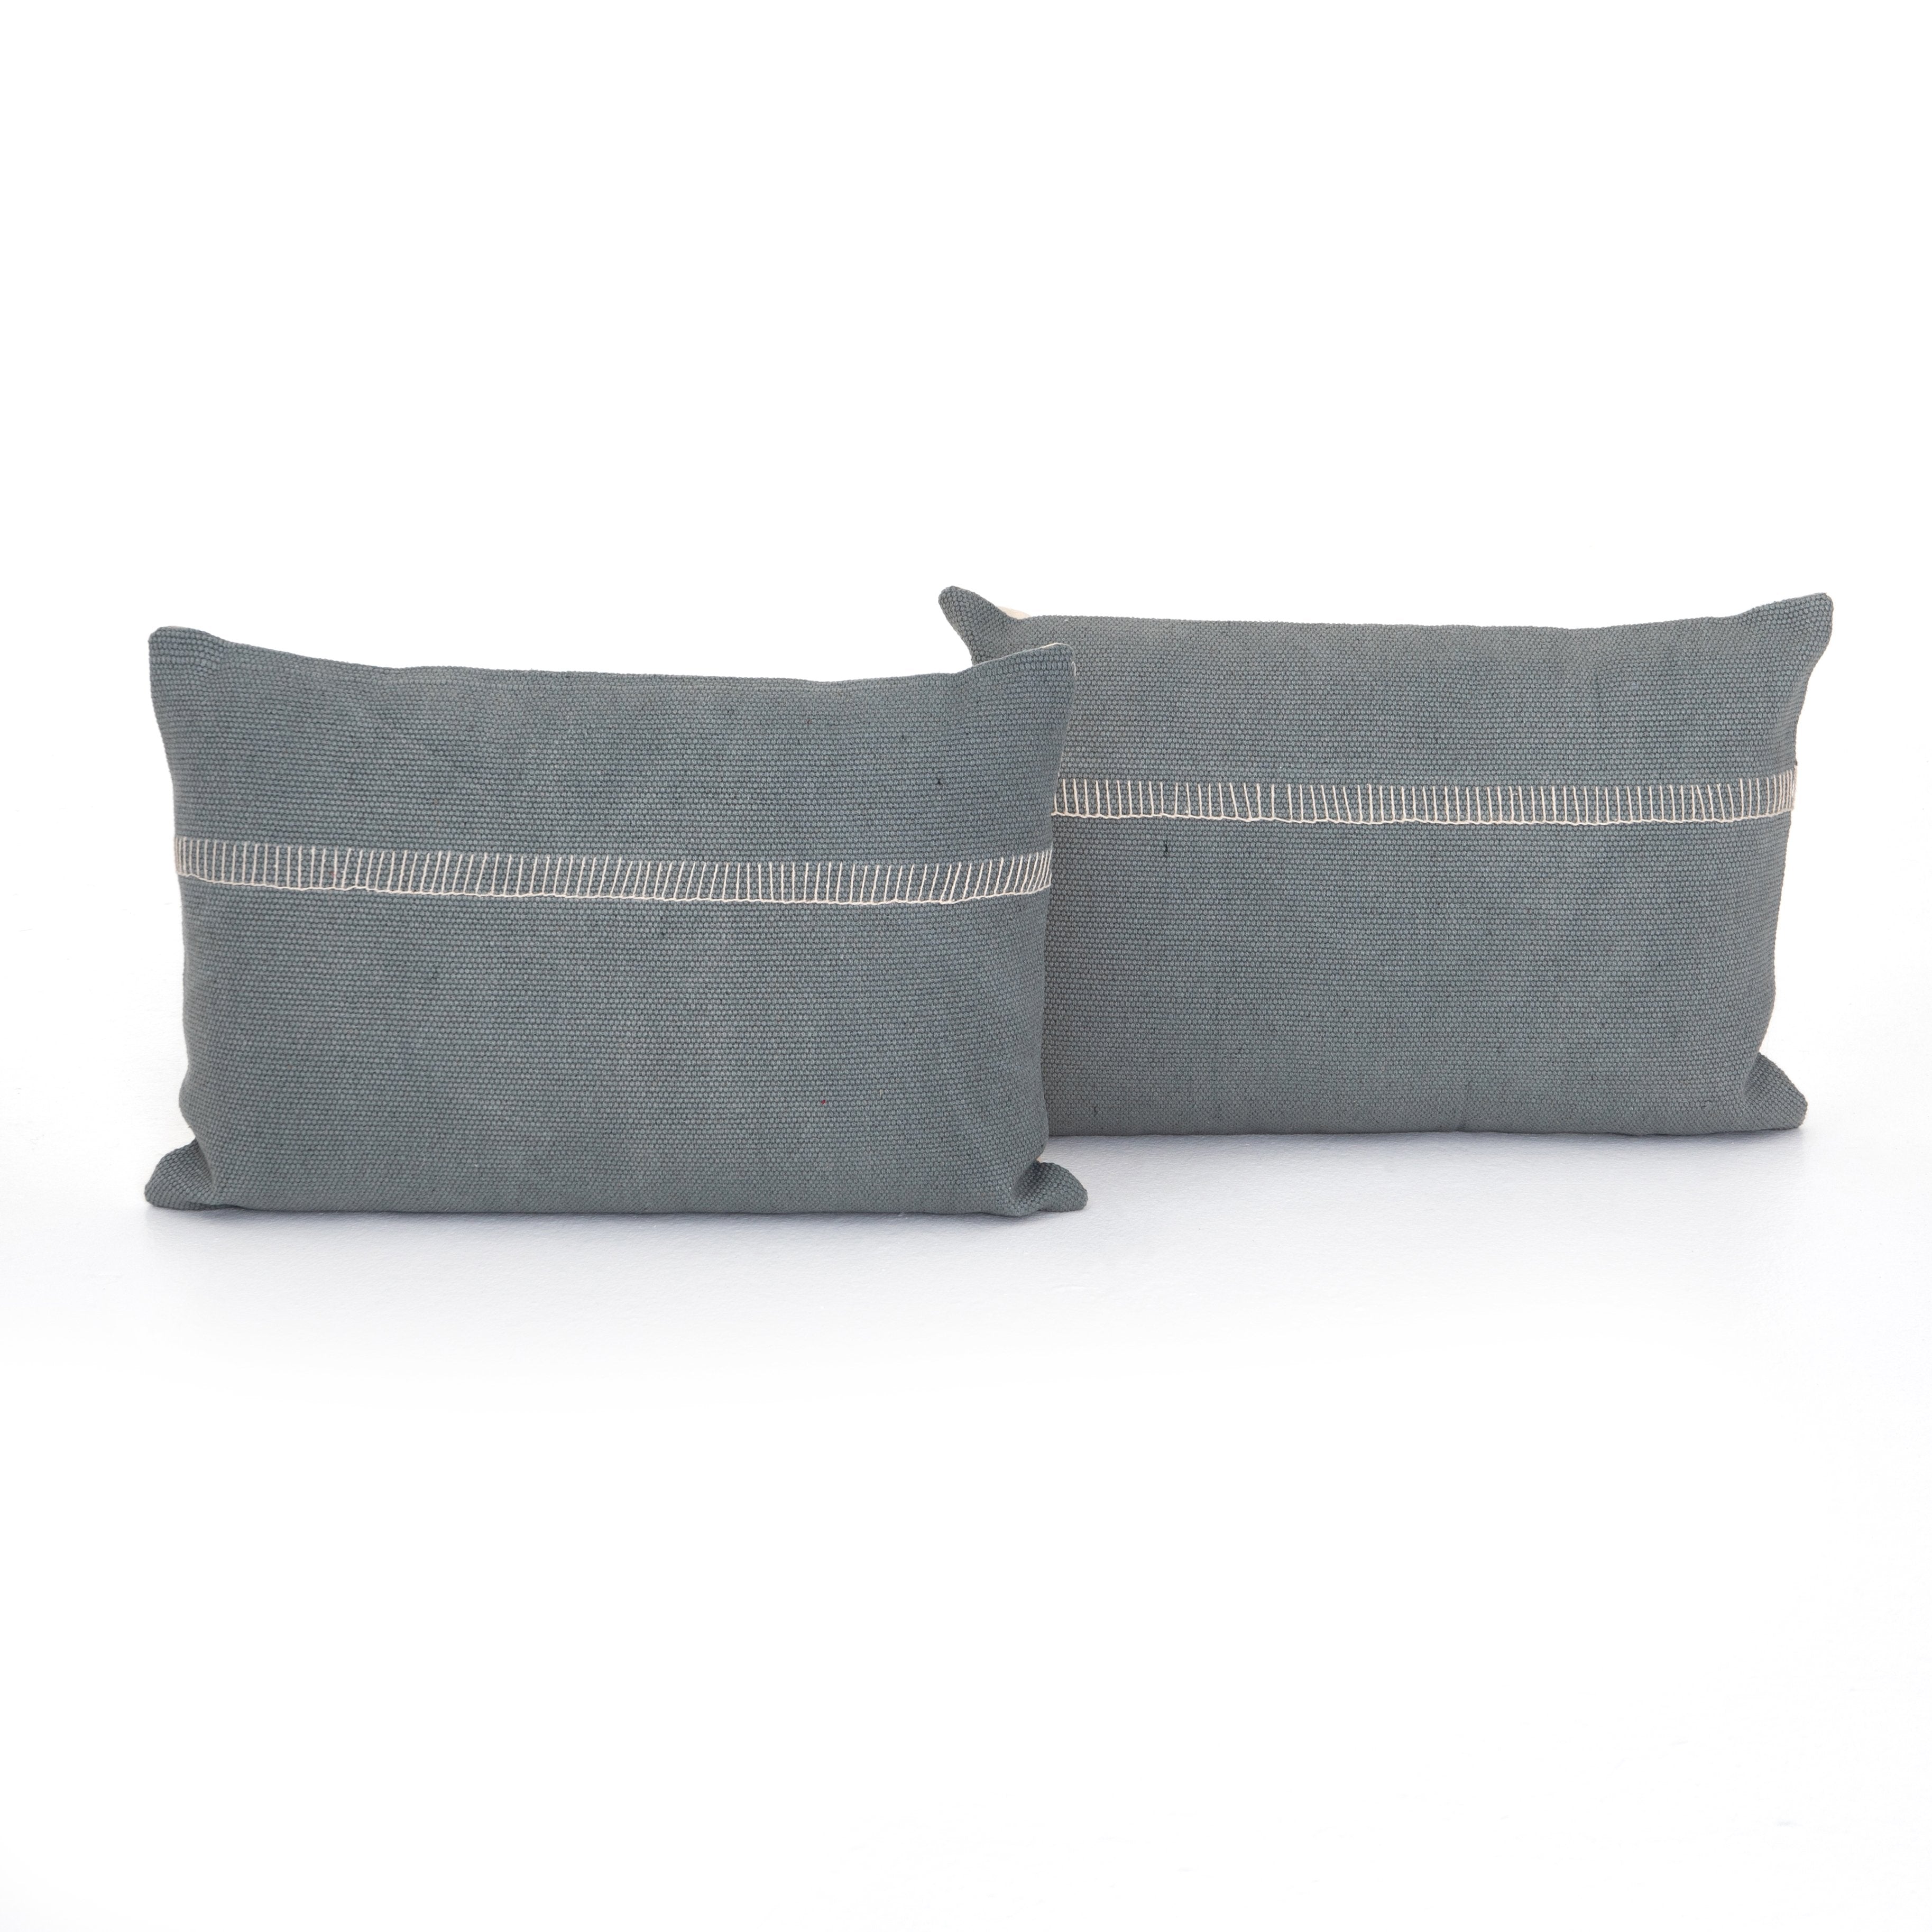 Alese Stone Pillow Set Of 2 in Various Sizes